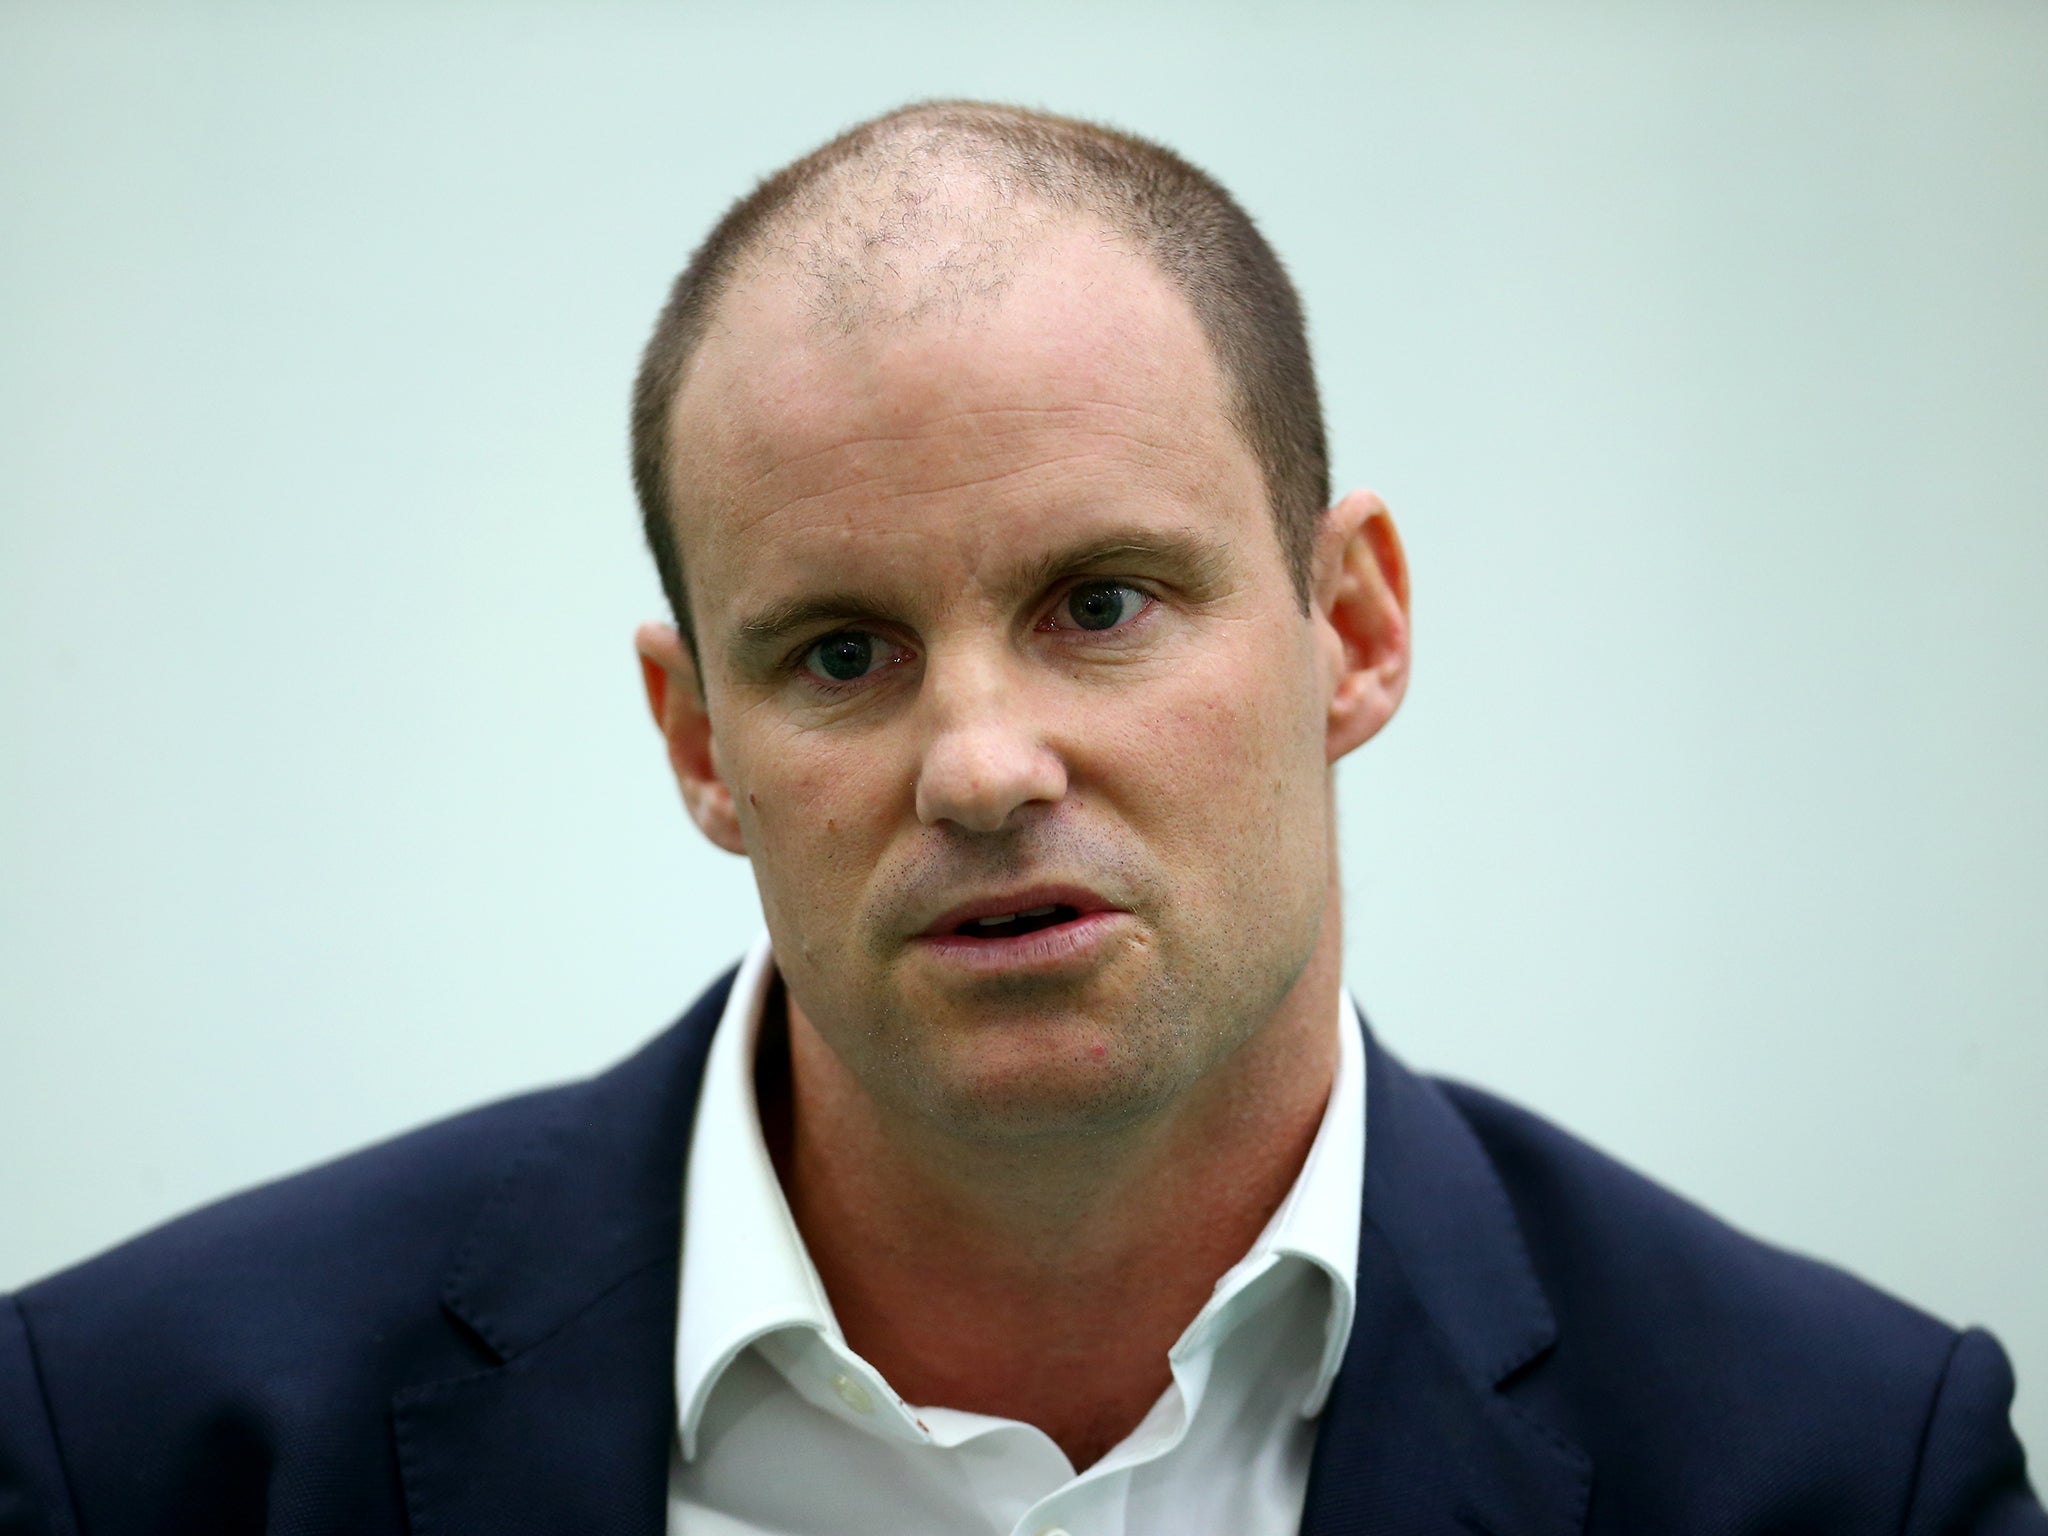 Strauss confirmed an internal ECB investigation will take place